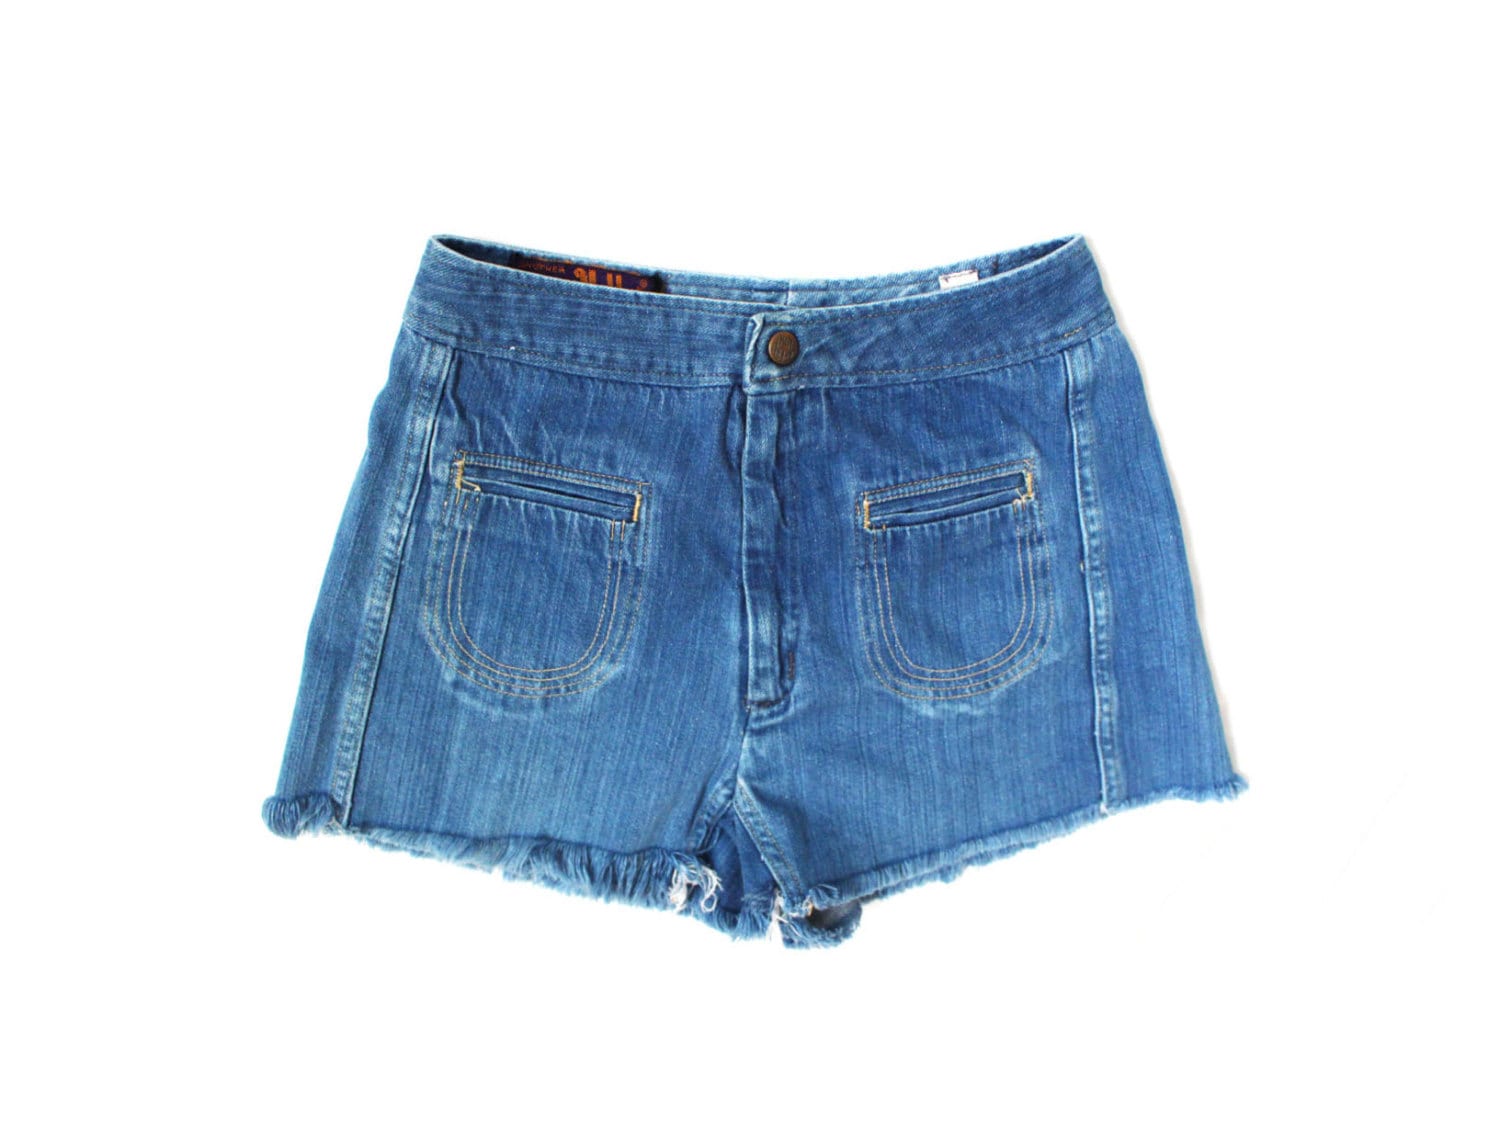 vintage jean shorts 1970s womens clothing high waisted denim